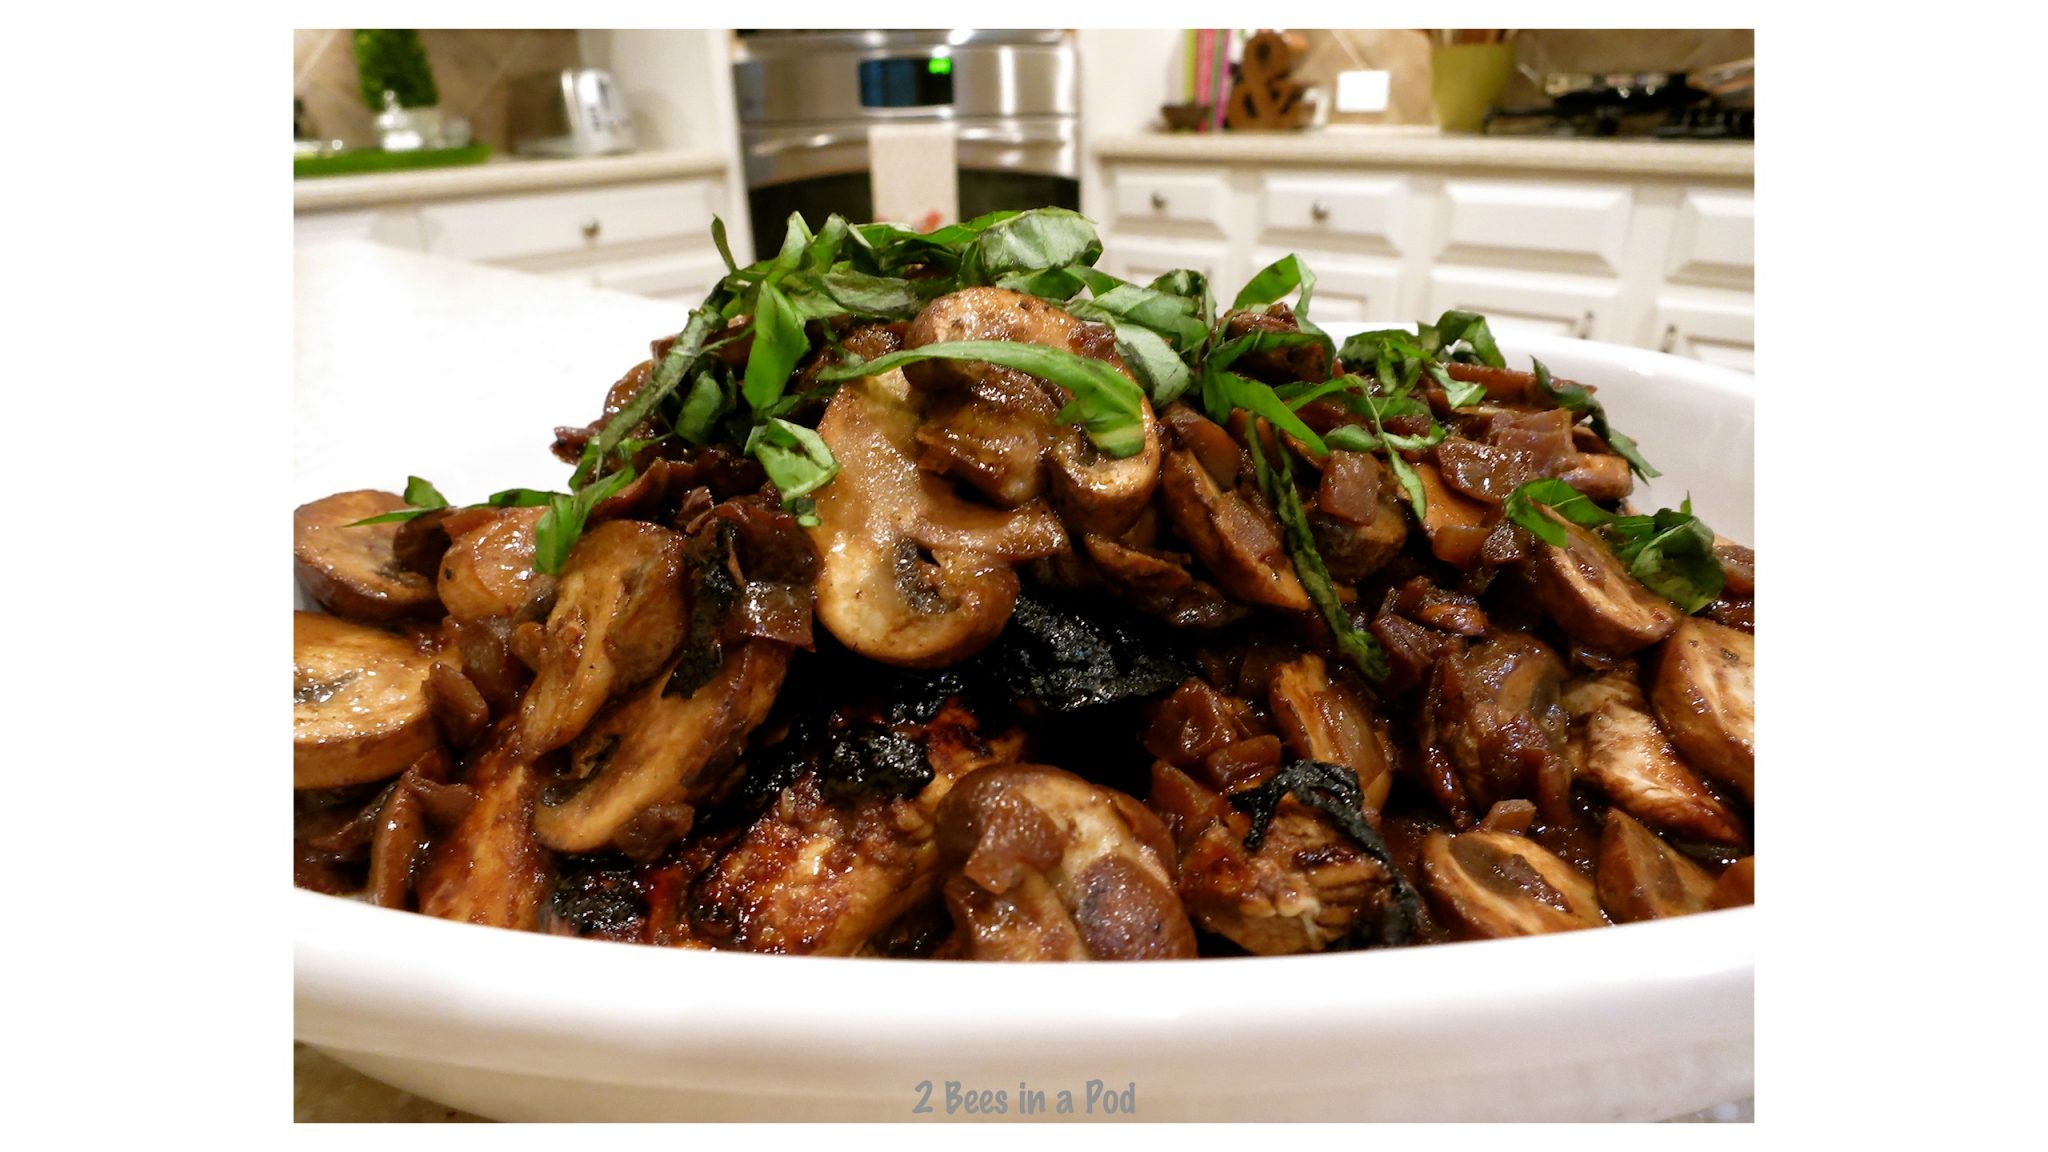 Balsamic Chicken with Mushrooms – I can’t believe it’s Weight Watchers